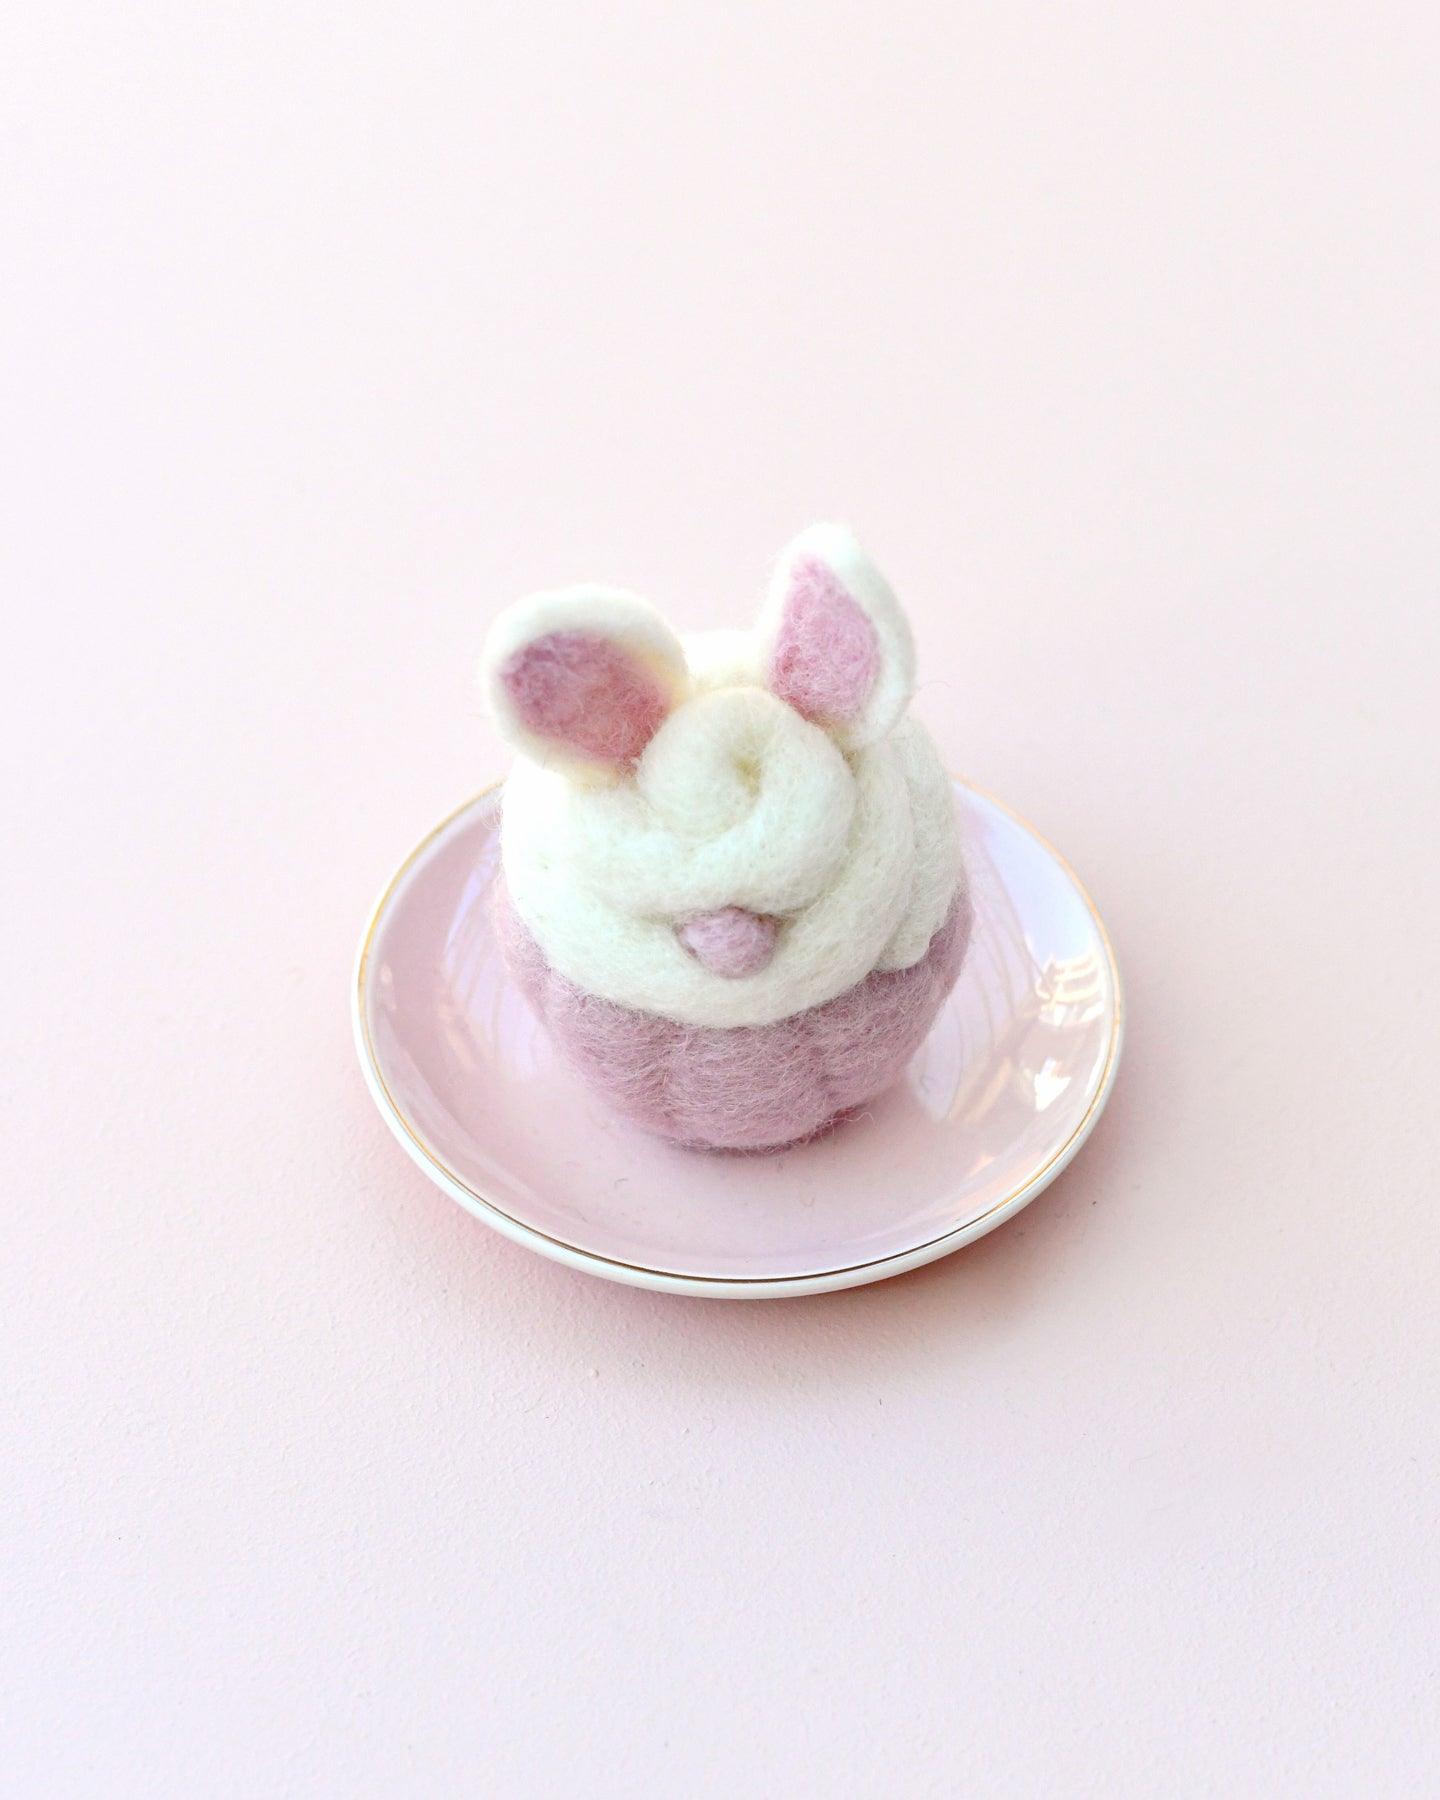 Felt Cupcake - Easter White Bunny with Ears